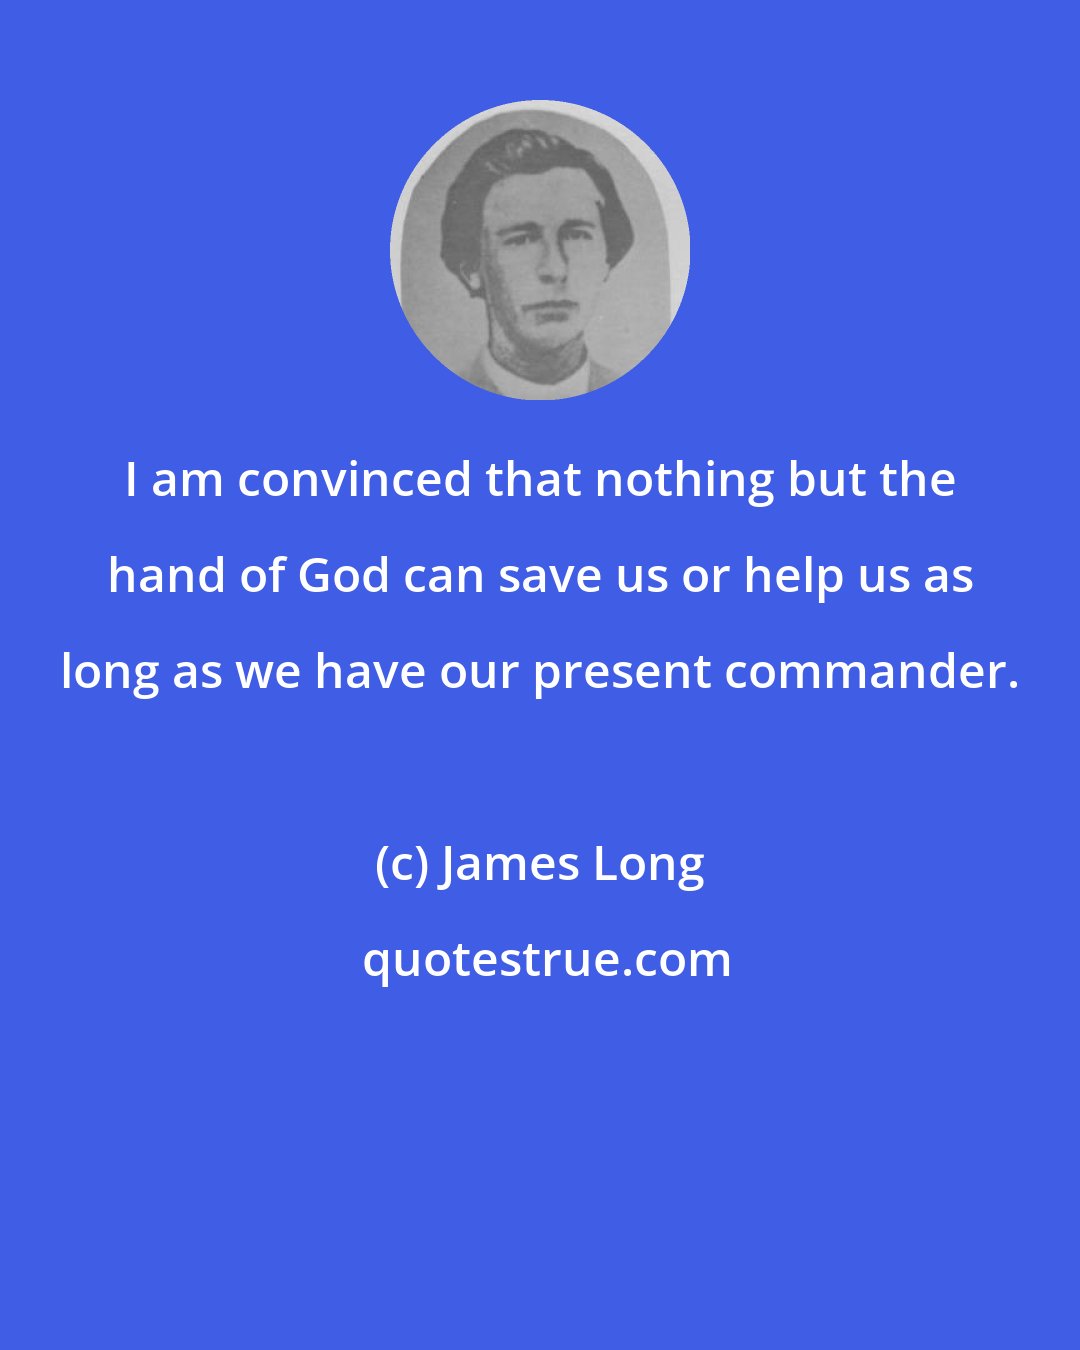 James Long: I am convinced that nothing but the hand of God can save us or help us as long as we have our present commander.